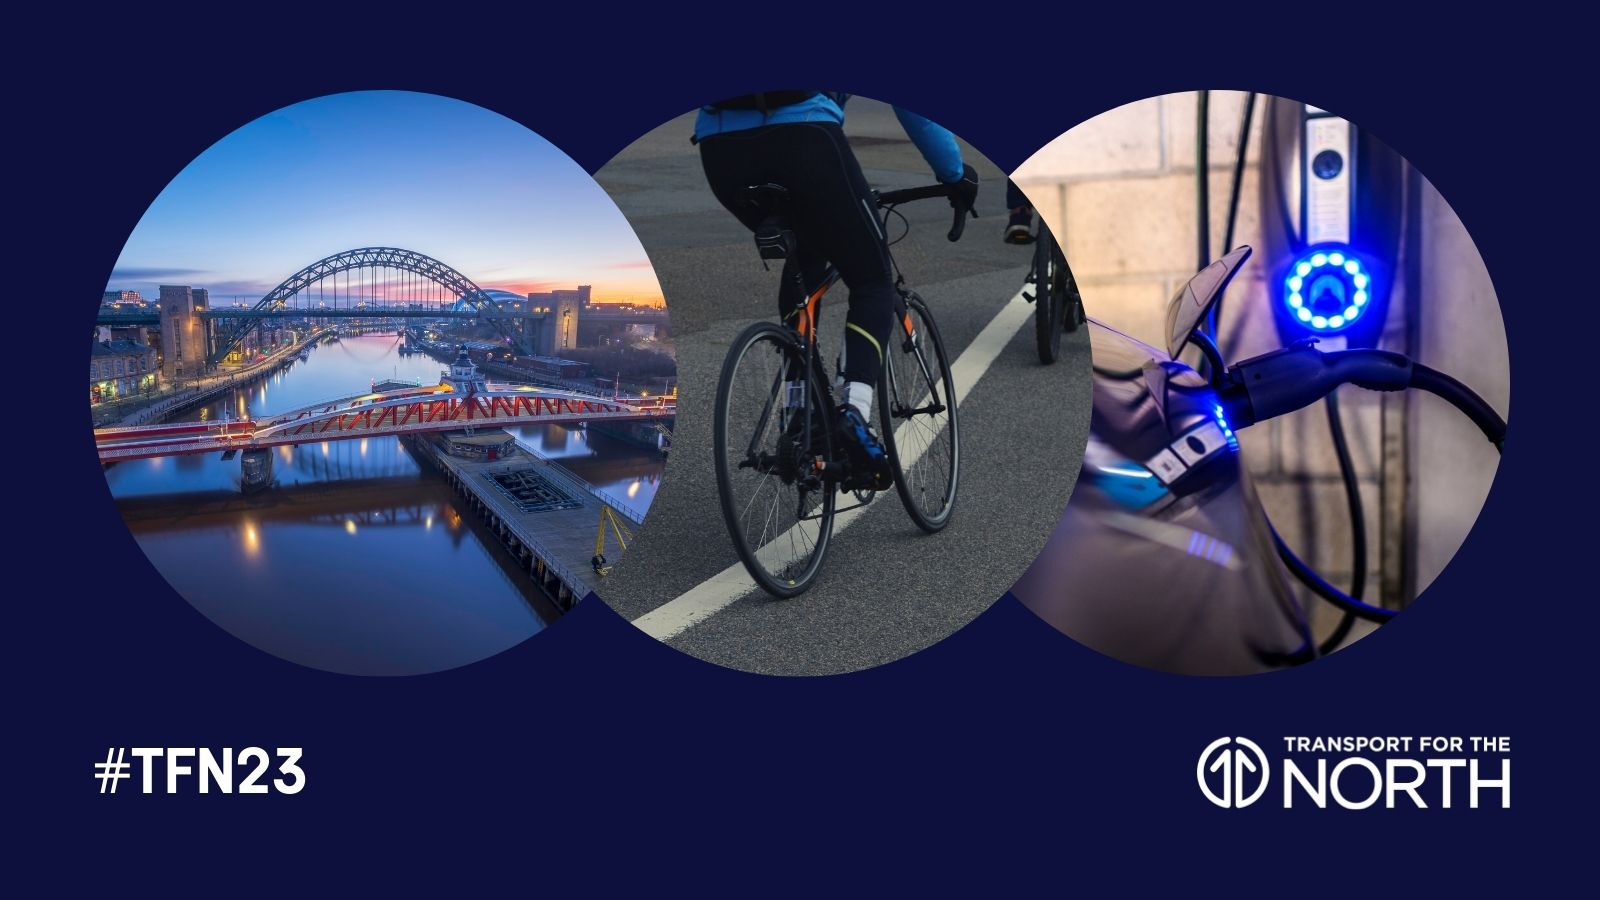 Newcastle skyline, person cycling a bike, electric vehicle charging